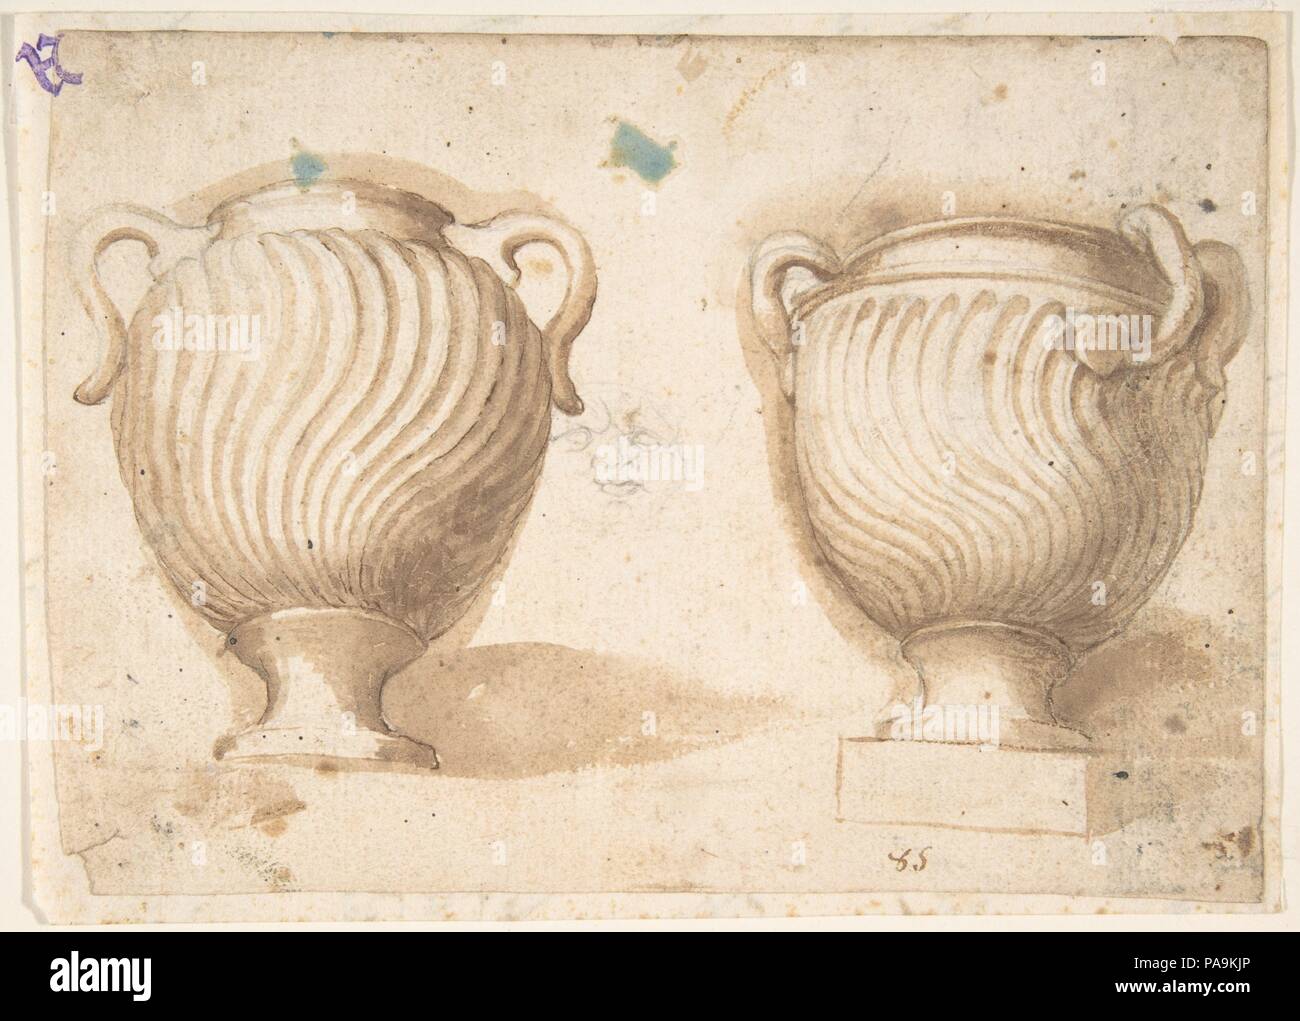 Two Antique Vases with Strigil Decorations. Artist: Anonymous, Italian, 18th century. Dimensions: 4-7/8 x 6-3/4 in. Date: 18th century. Museum: Metropolitan Museum of Art, New York, USA. Stock Photo